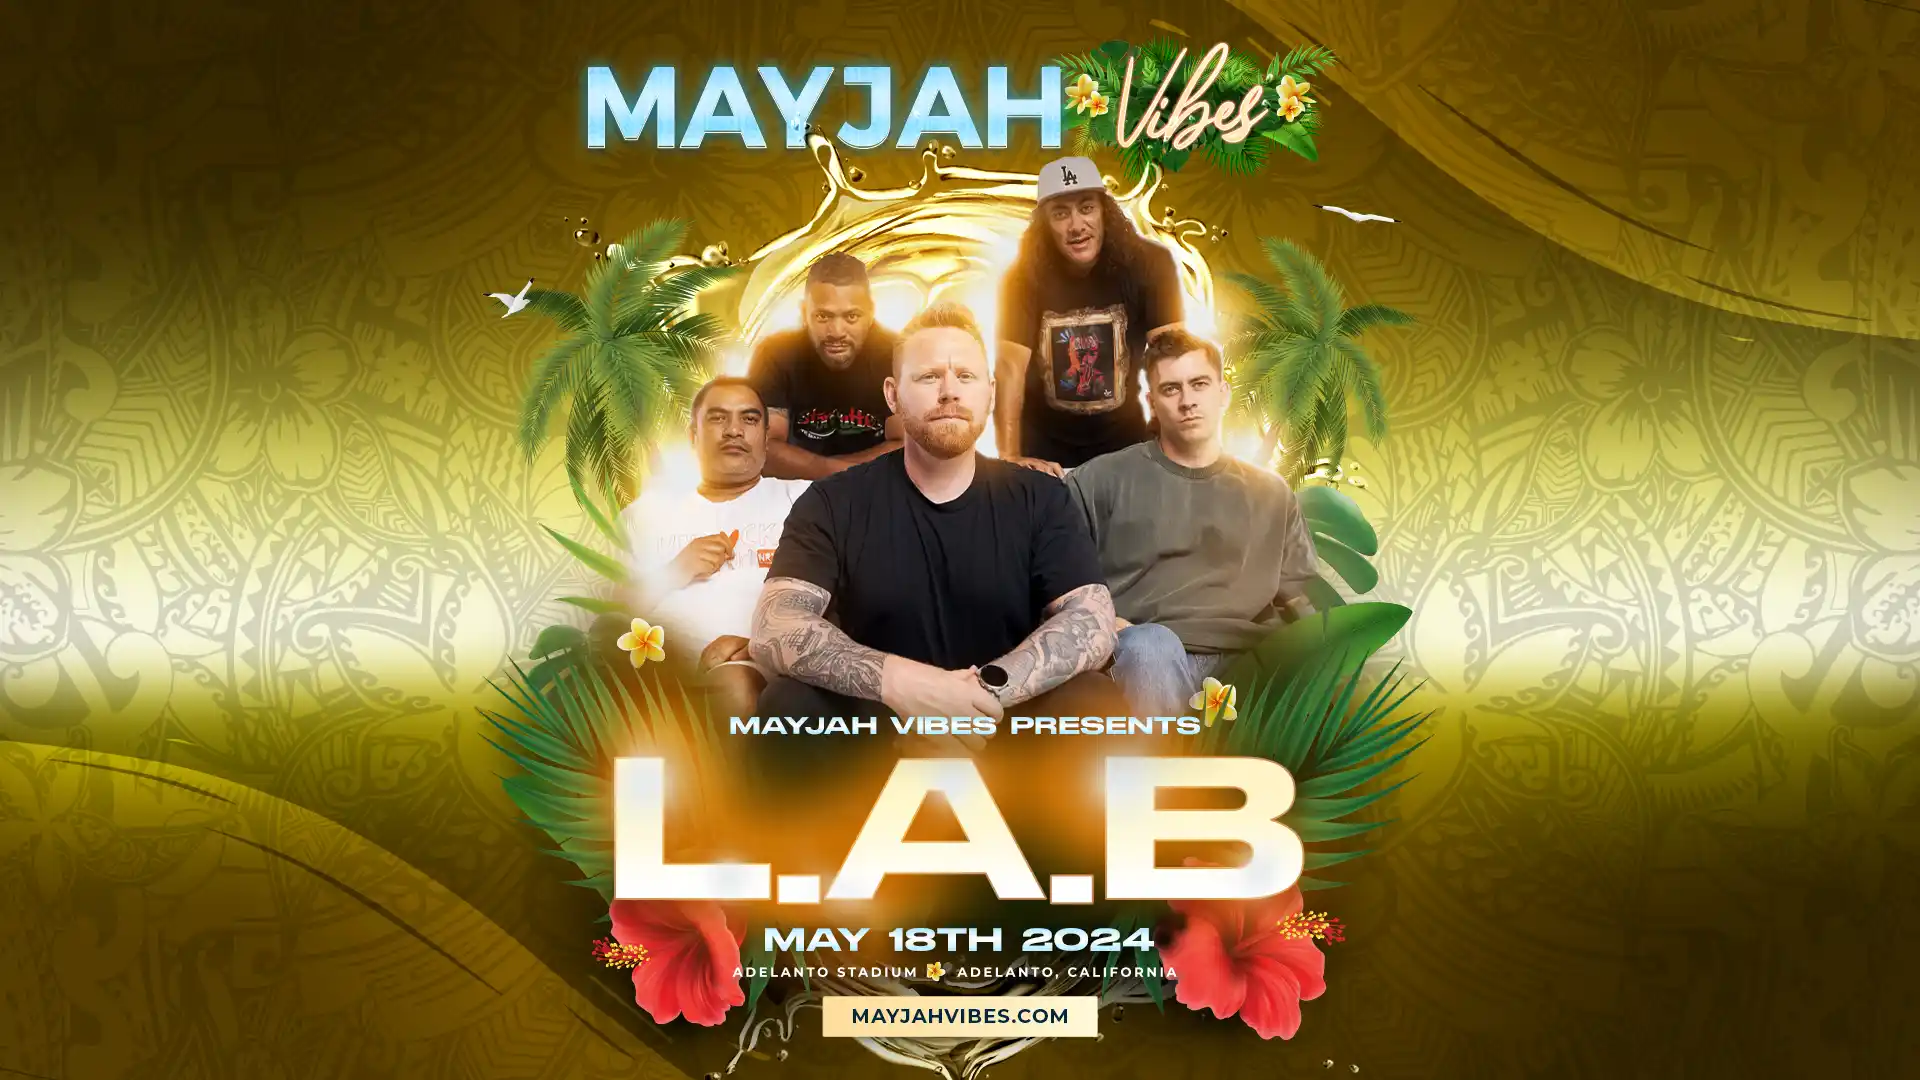 L.A.B will be performing LIVE at Mayjah Vibes 2024 in Adelanto, California on May 18th.